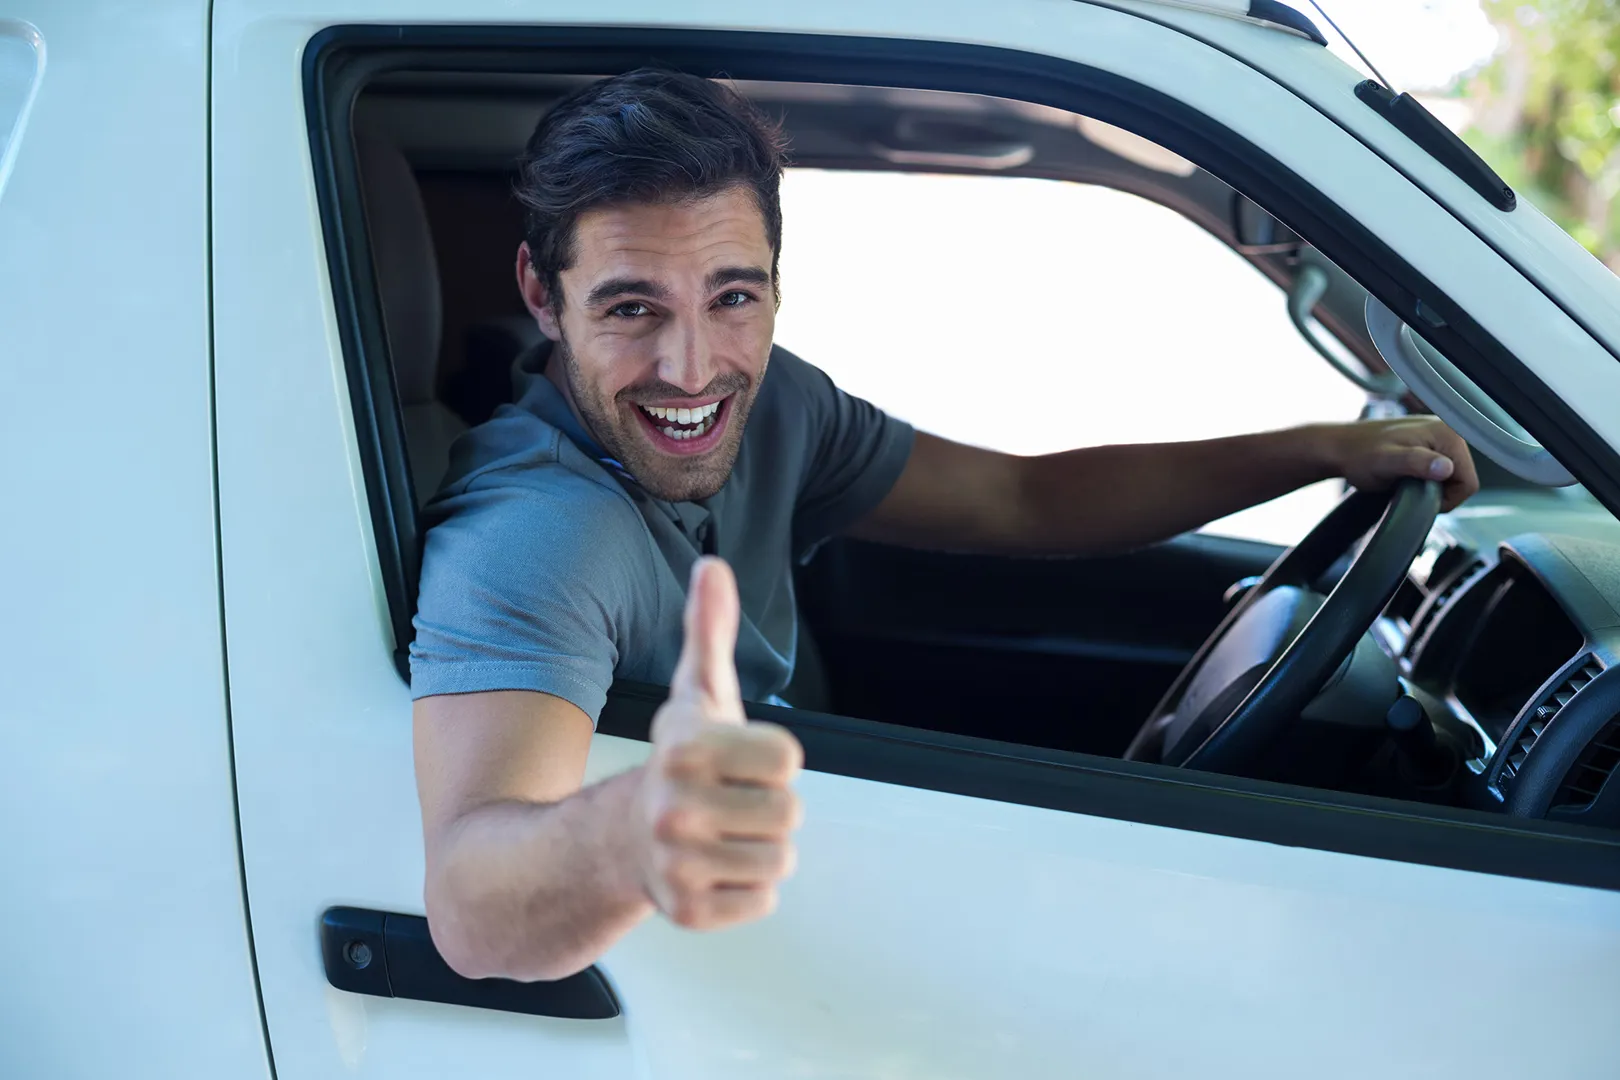 A man with a cheerful expression drives a white van, radiating happiness as he navigates the road.